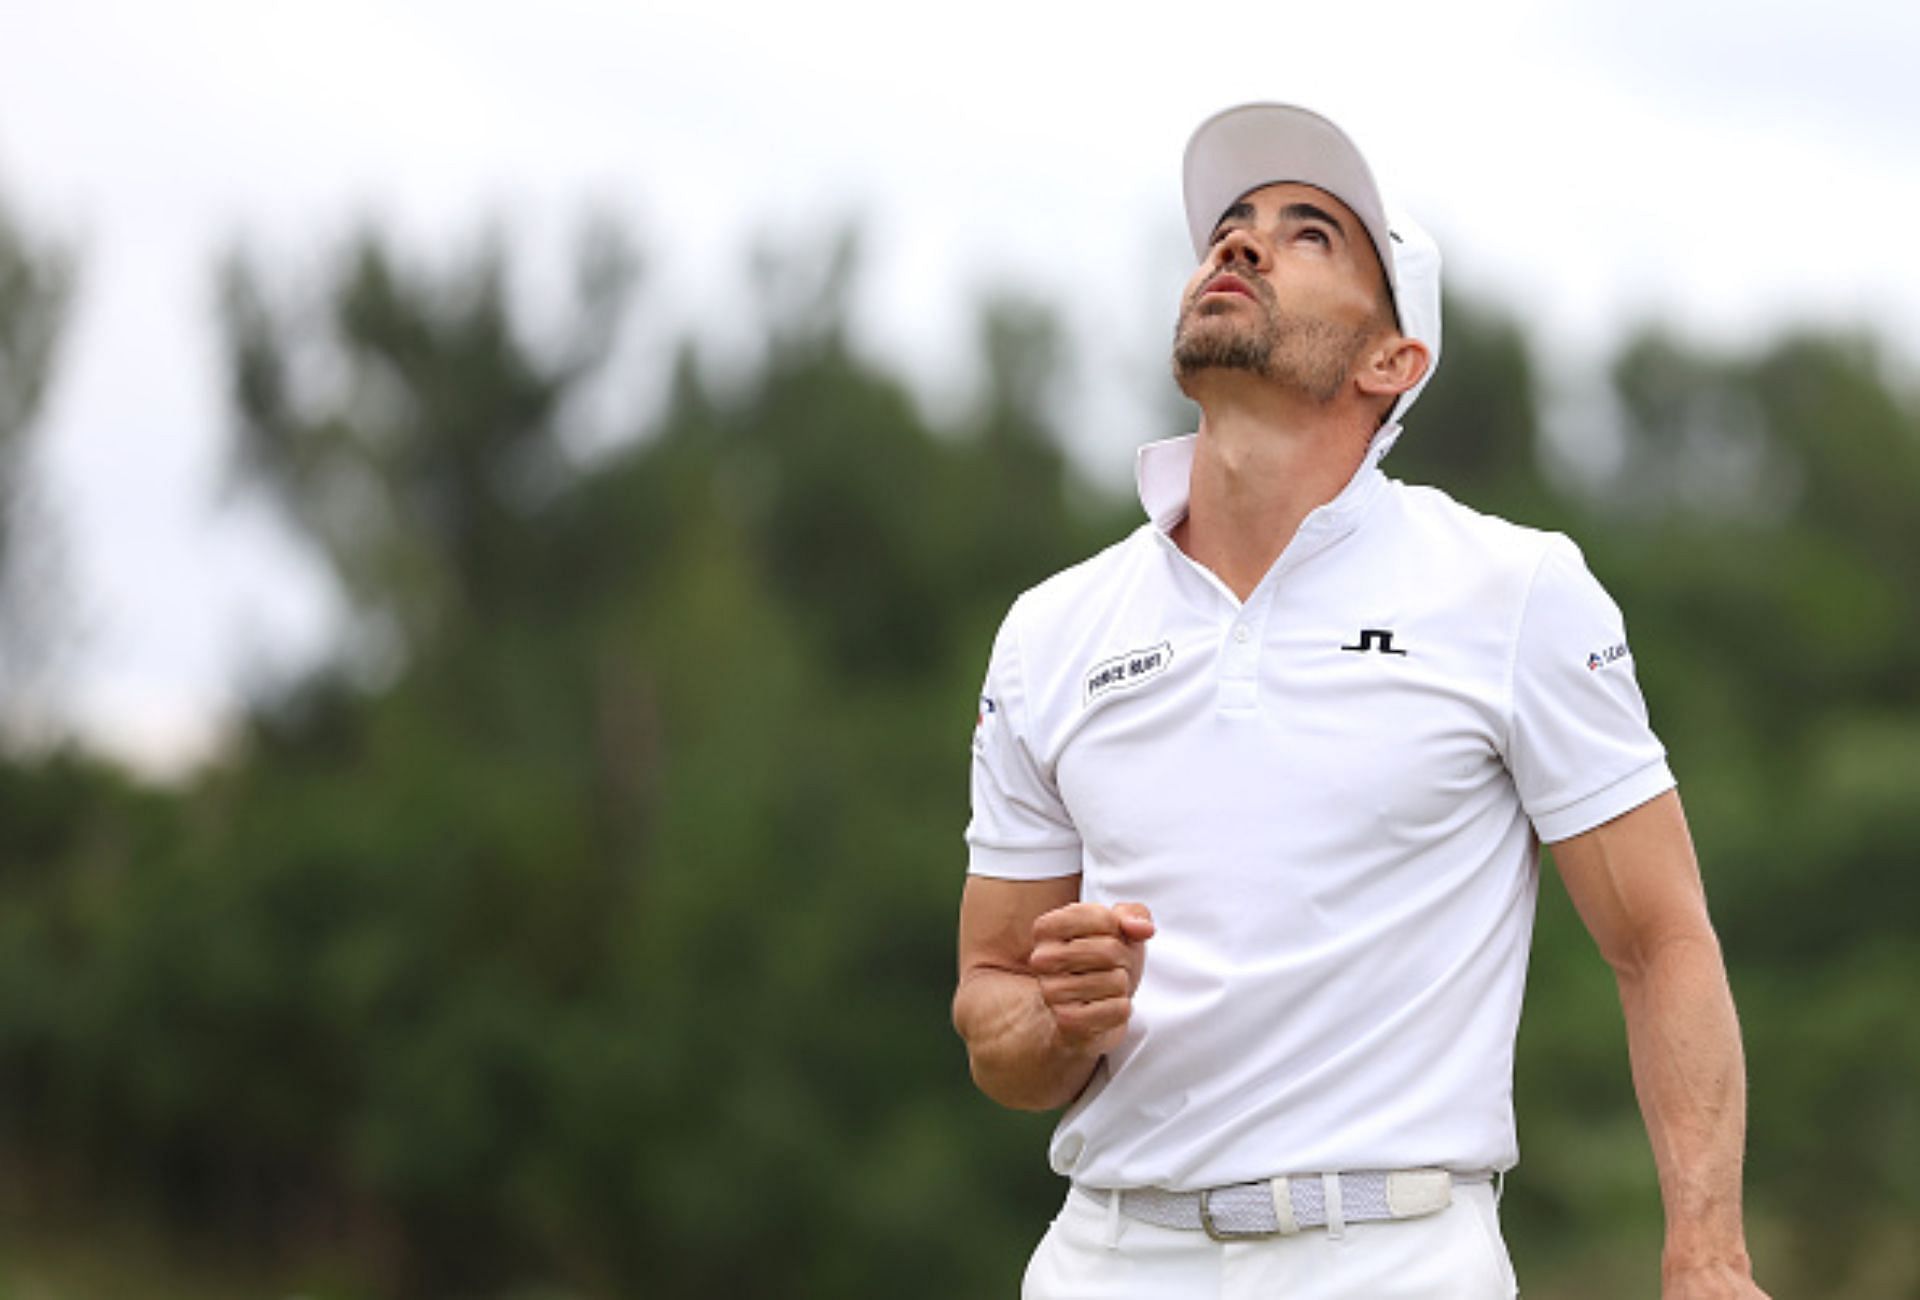 Camilo Villegas thanking to the sky after winning the 2023 Butterfield Bermuda Championship (Image via Getty).